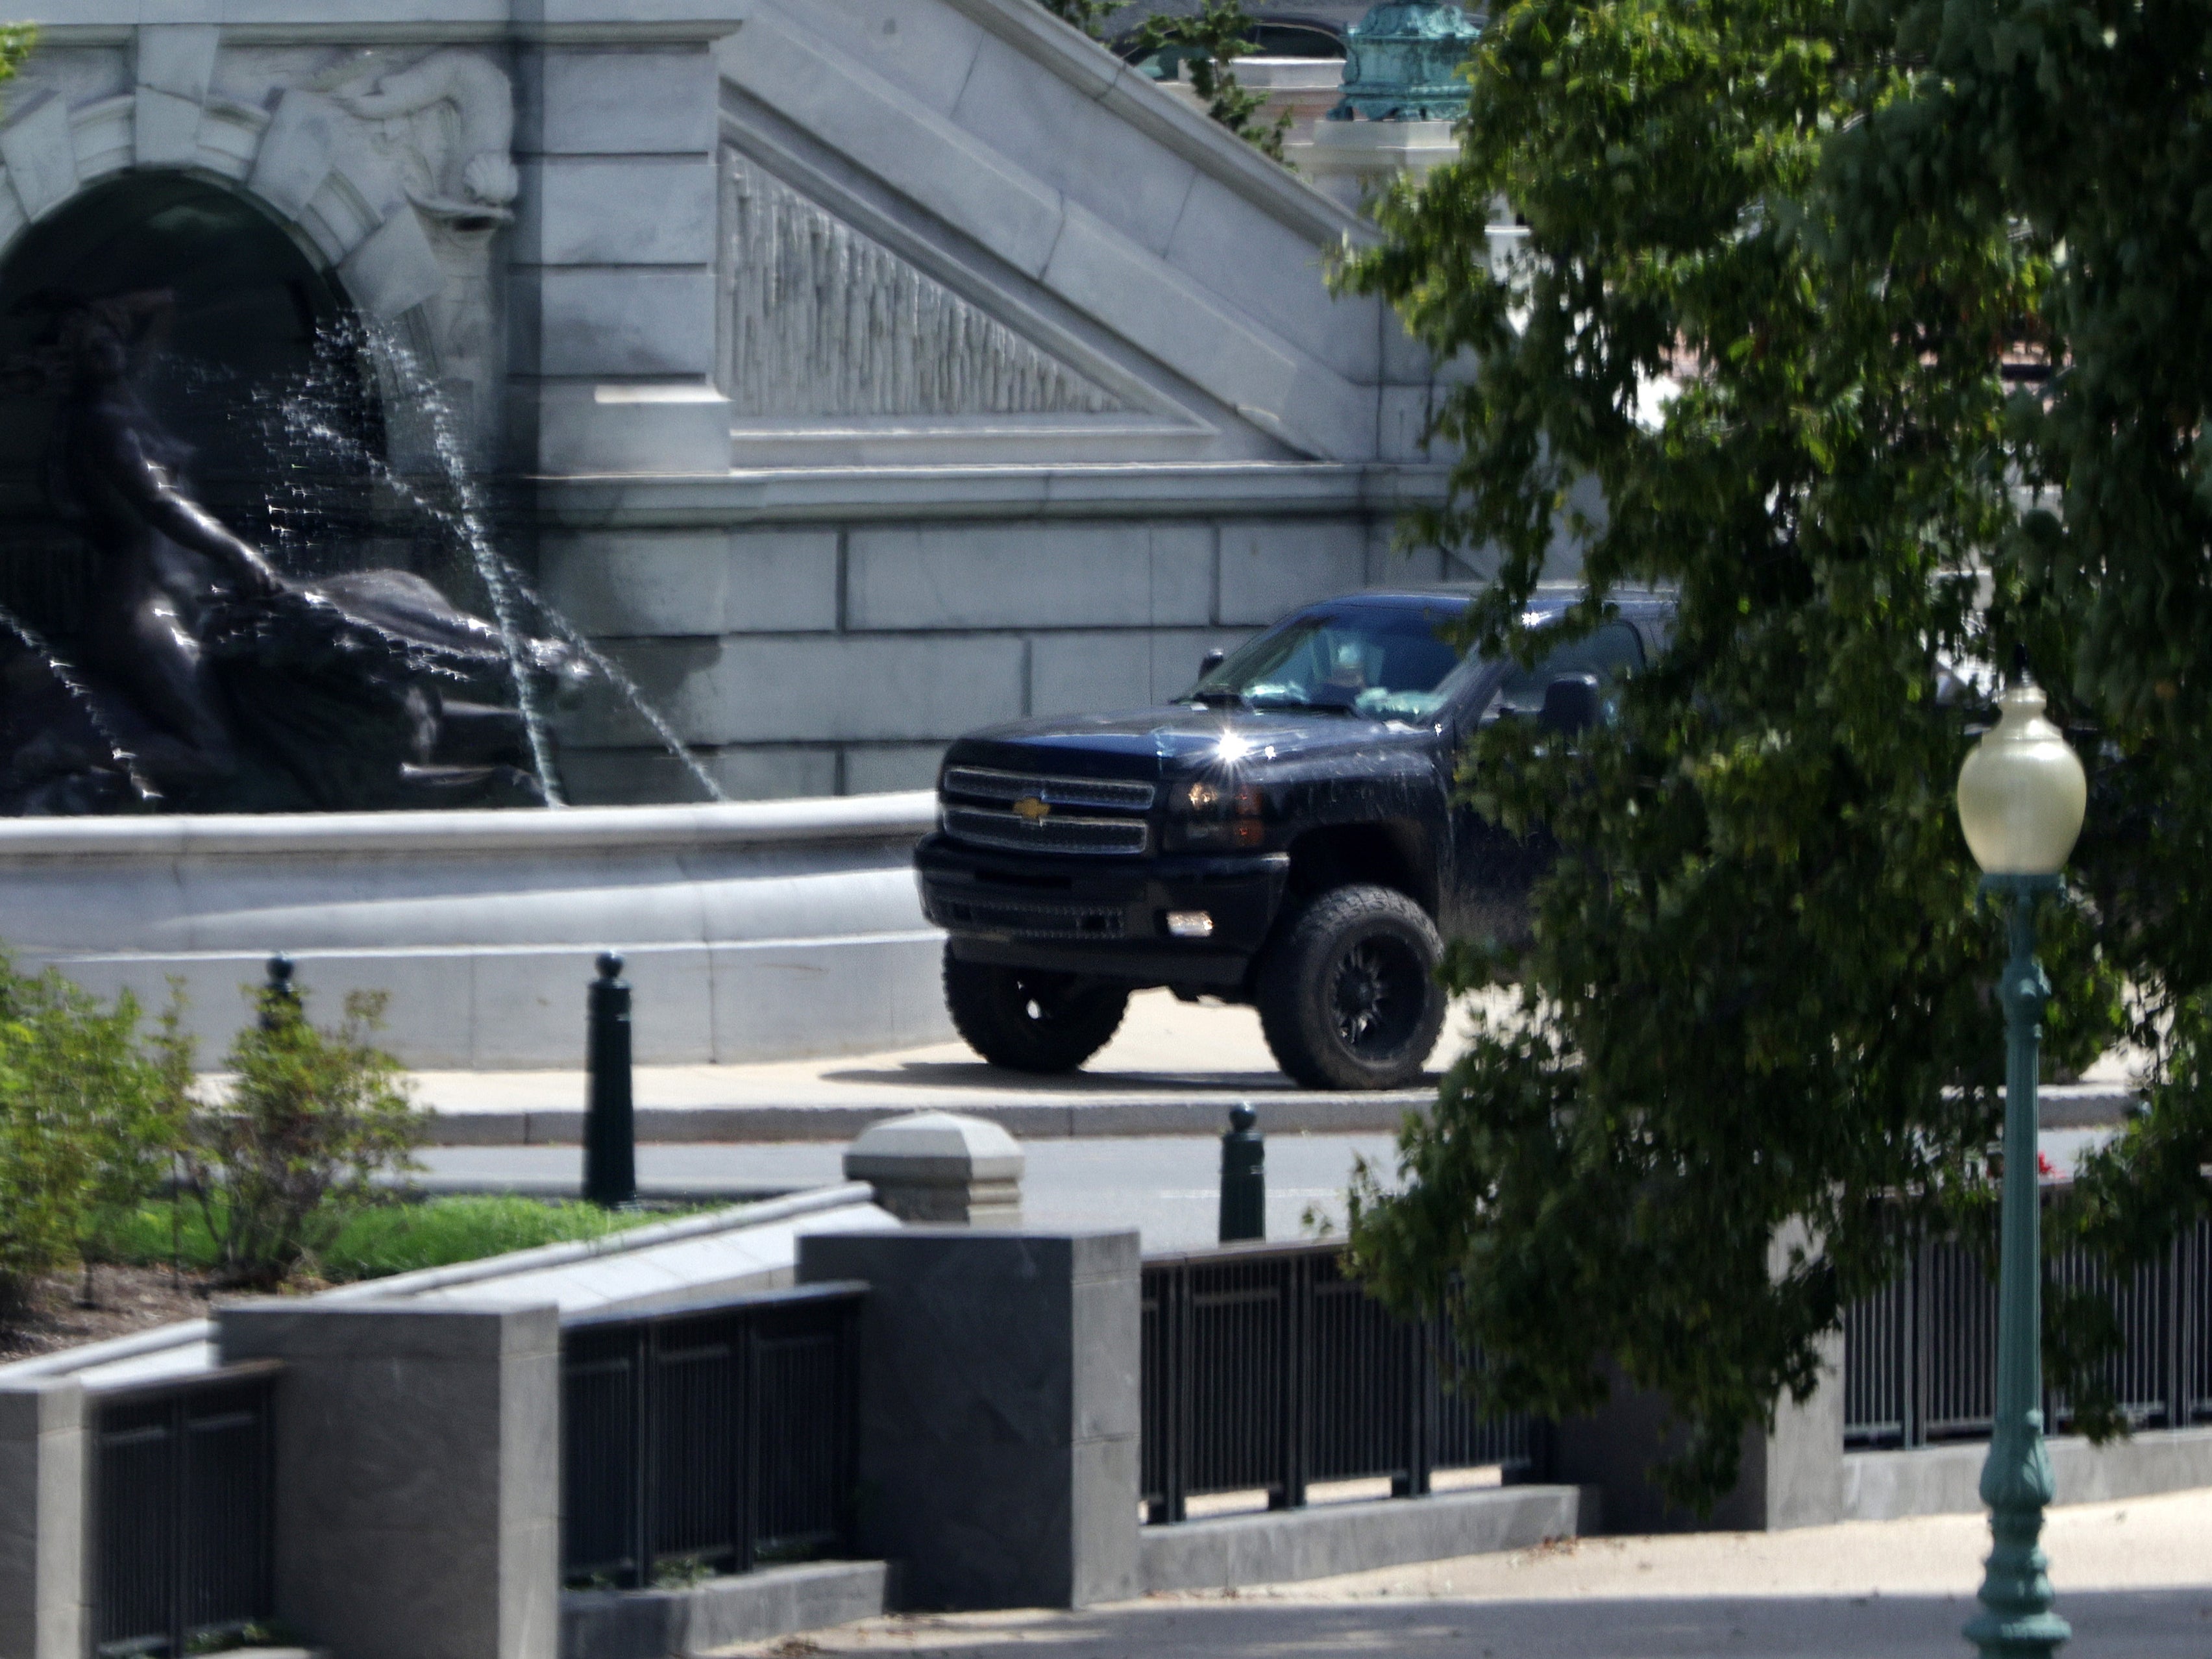 A pickup truck sits outside the Library of Congress, directly across from the U.S. Capitol, on Capitol Hill August 19, 2021 in Washington, DC. A man drove a pickup truck onto the sidewalk outside the Library this morning telling police officers that he had a bomb